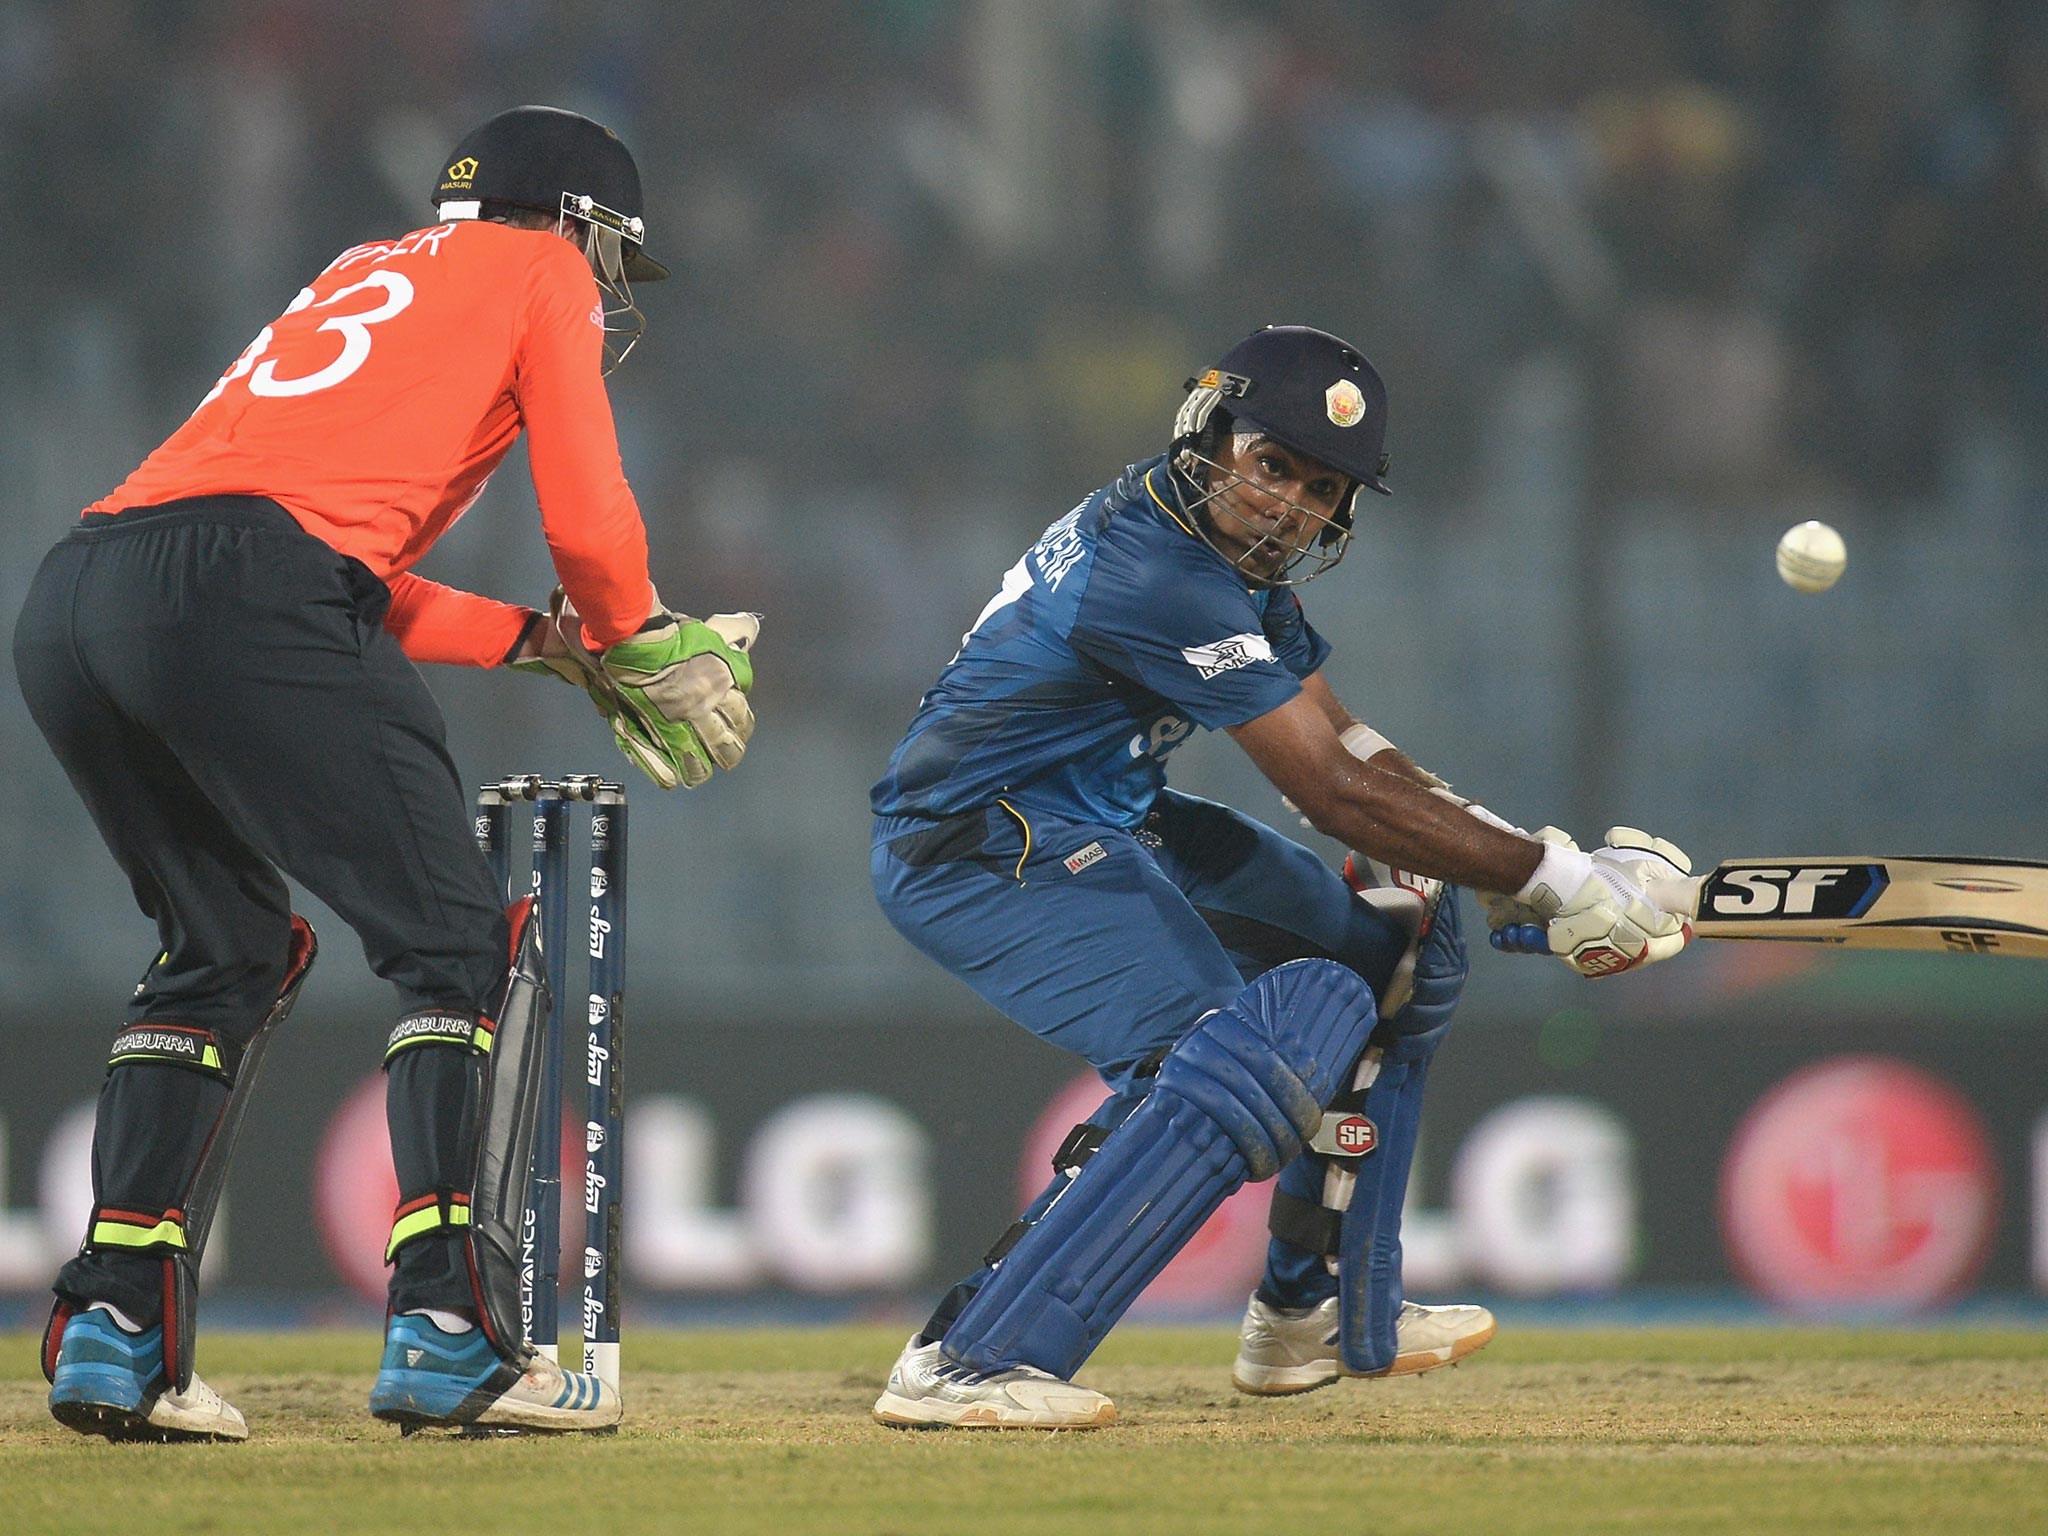 Sri Lankan batsman Mahela Jayawardene was given not-out when England were convinced they had caught him